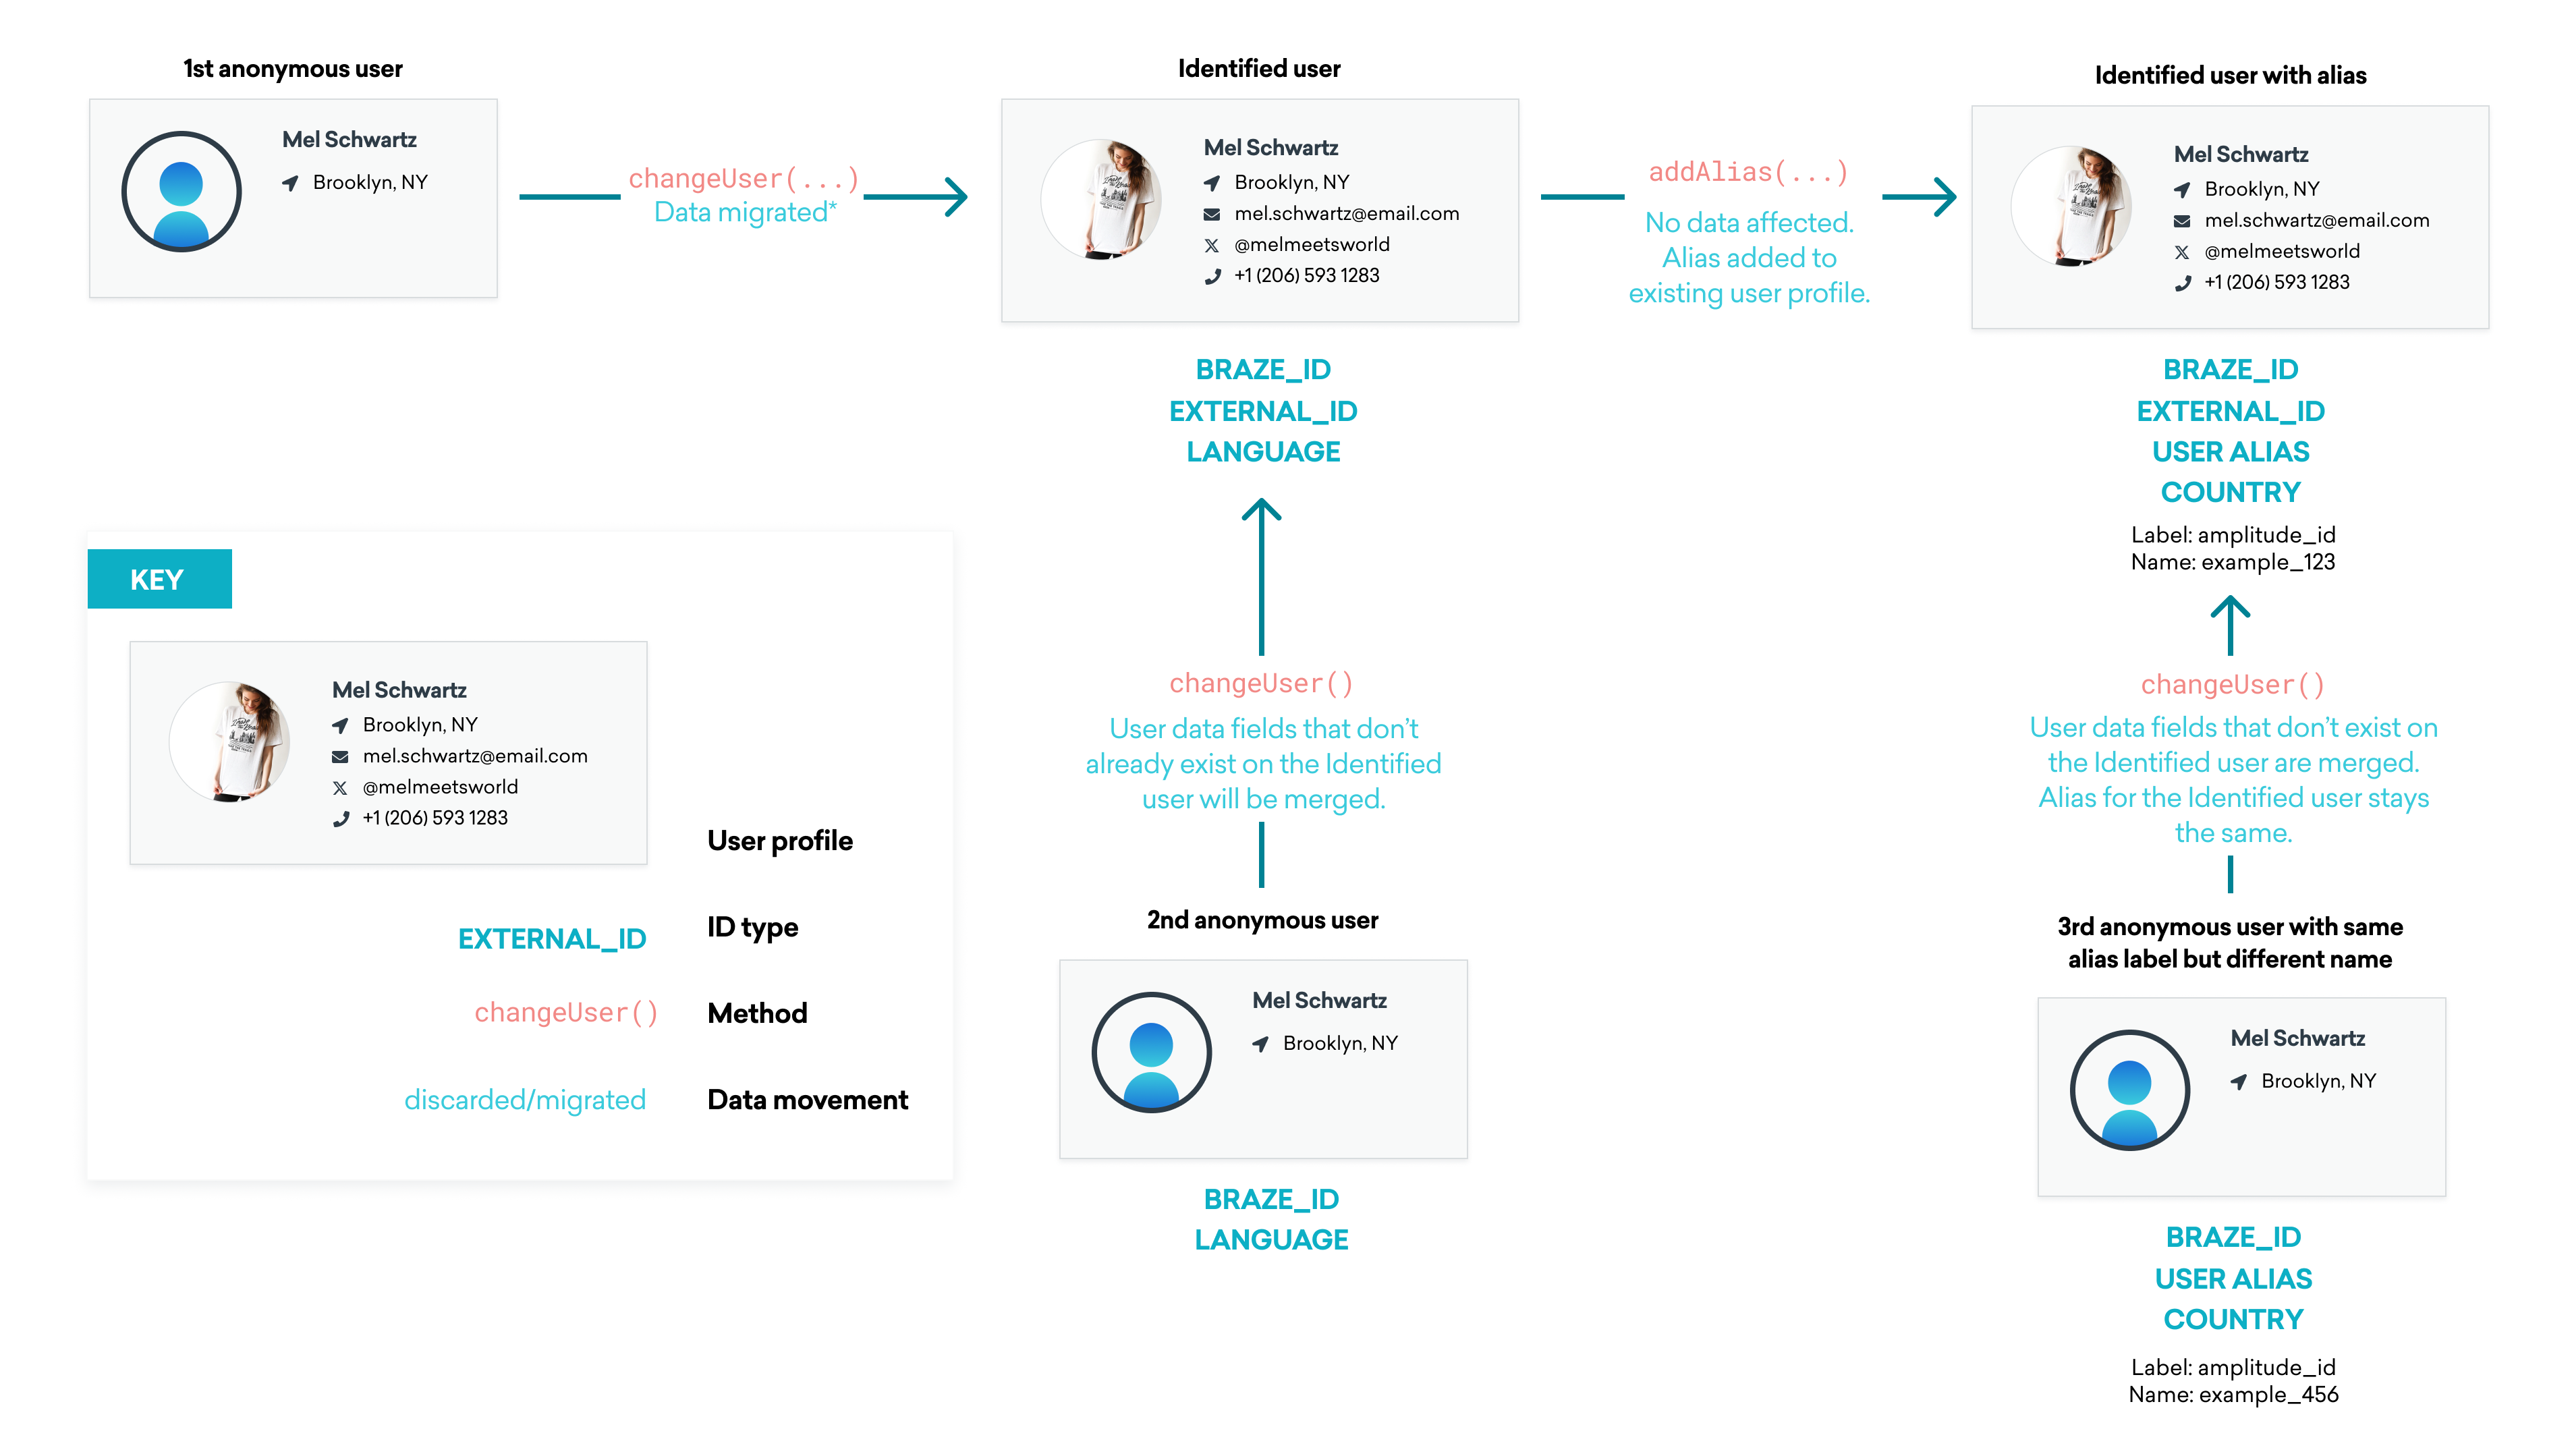 A flow chart of a user profile's lifecycle in Braze. When changeUser() is called for an anonymous user, that user becomes an Identified User and data is migrated to their identified user profile. The Identified User has a Braze ID and external ID. At this point, if a second anonymous user has changeUser() called, their anonymous user data will be orphaned. If the Identified User has an alias added to their existing user profile, no data will be affected but they will become an Identified User with alias. If a third anonymous user with the same alias label as the identified user but a different alias name then has changeUser() called, the existing data is discarded and only the alias label on the identified user profile is maintained.